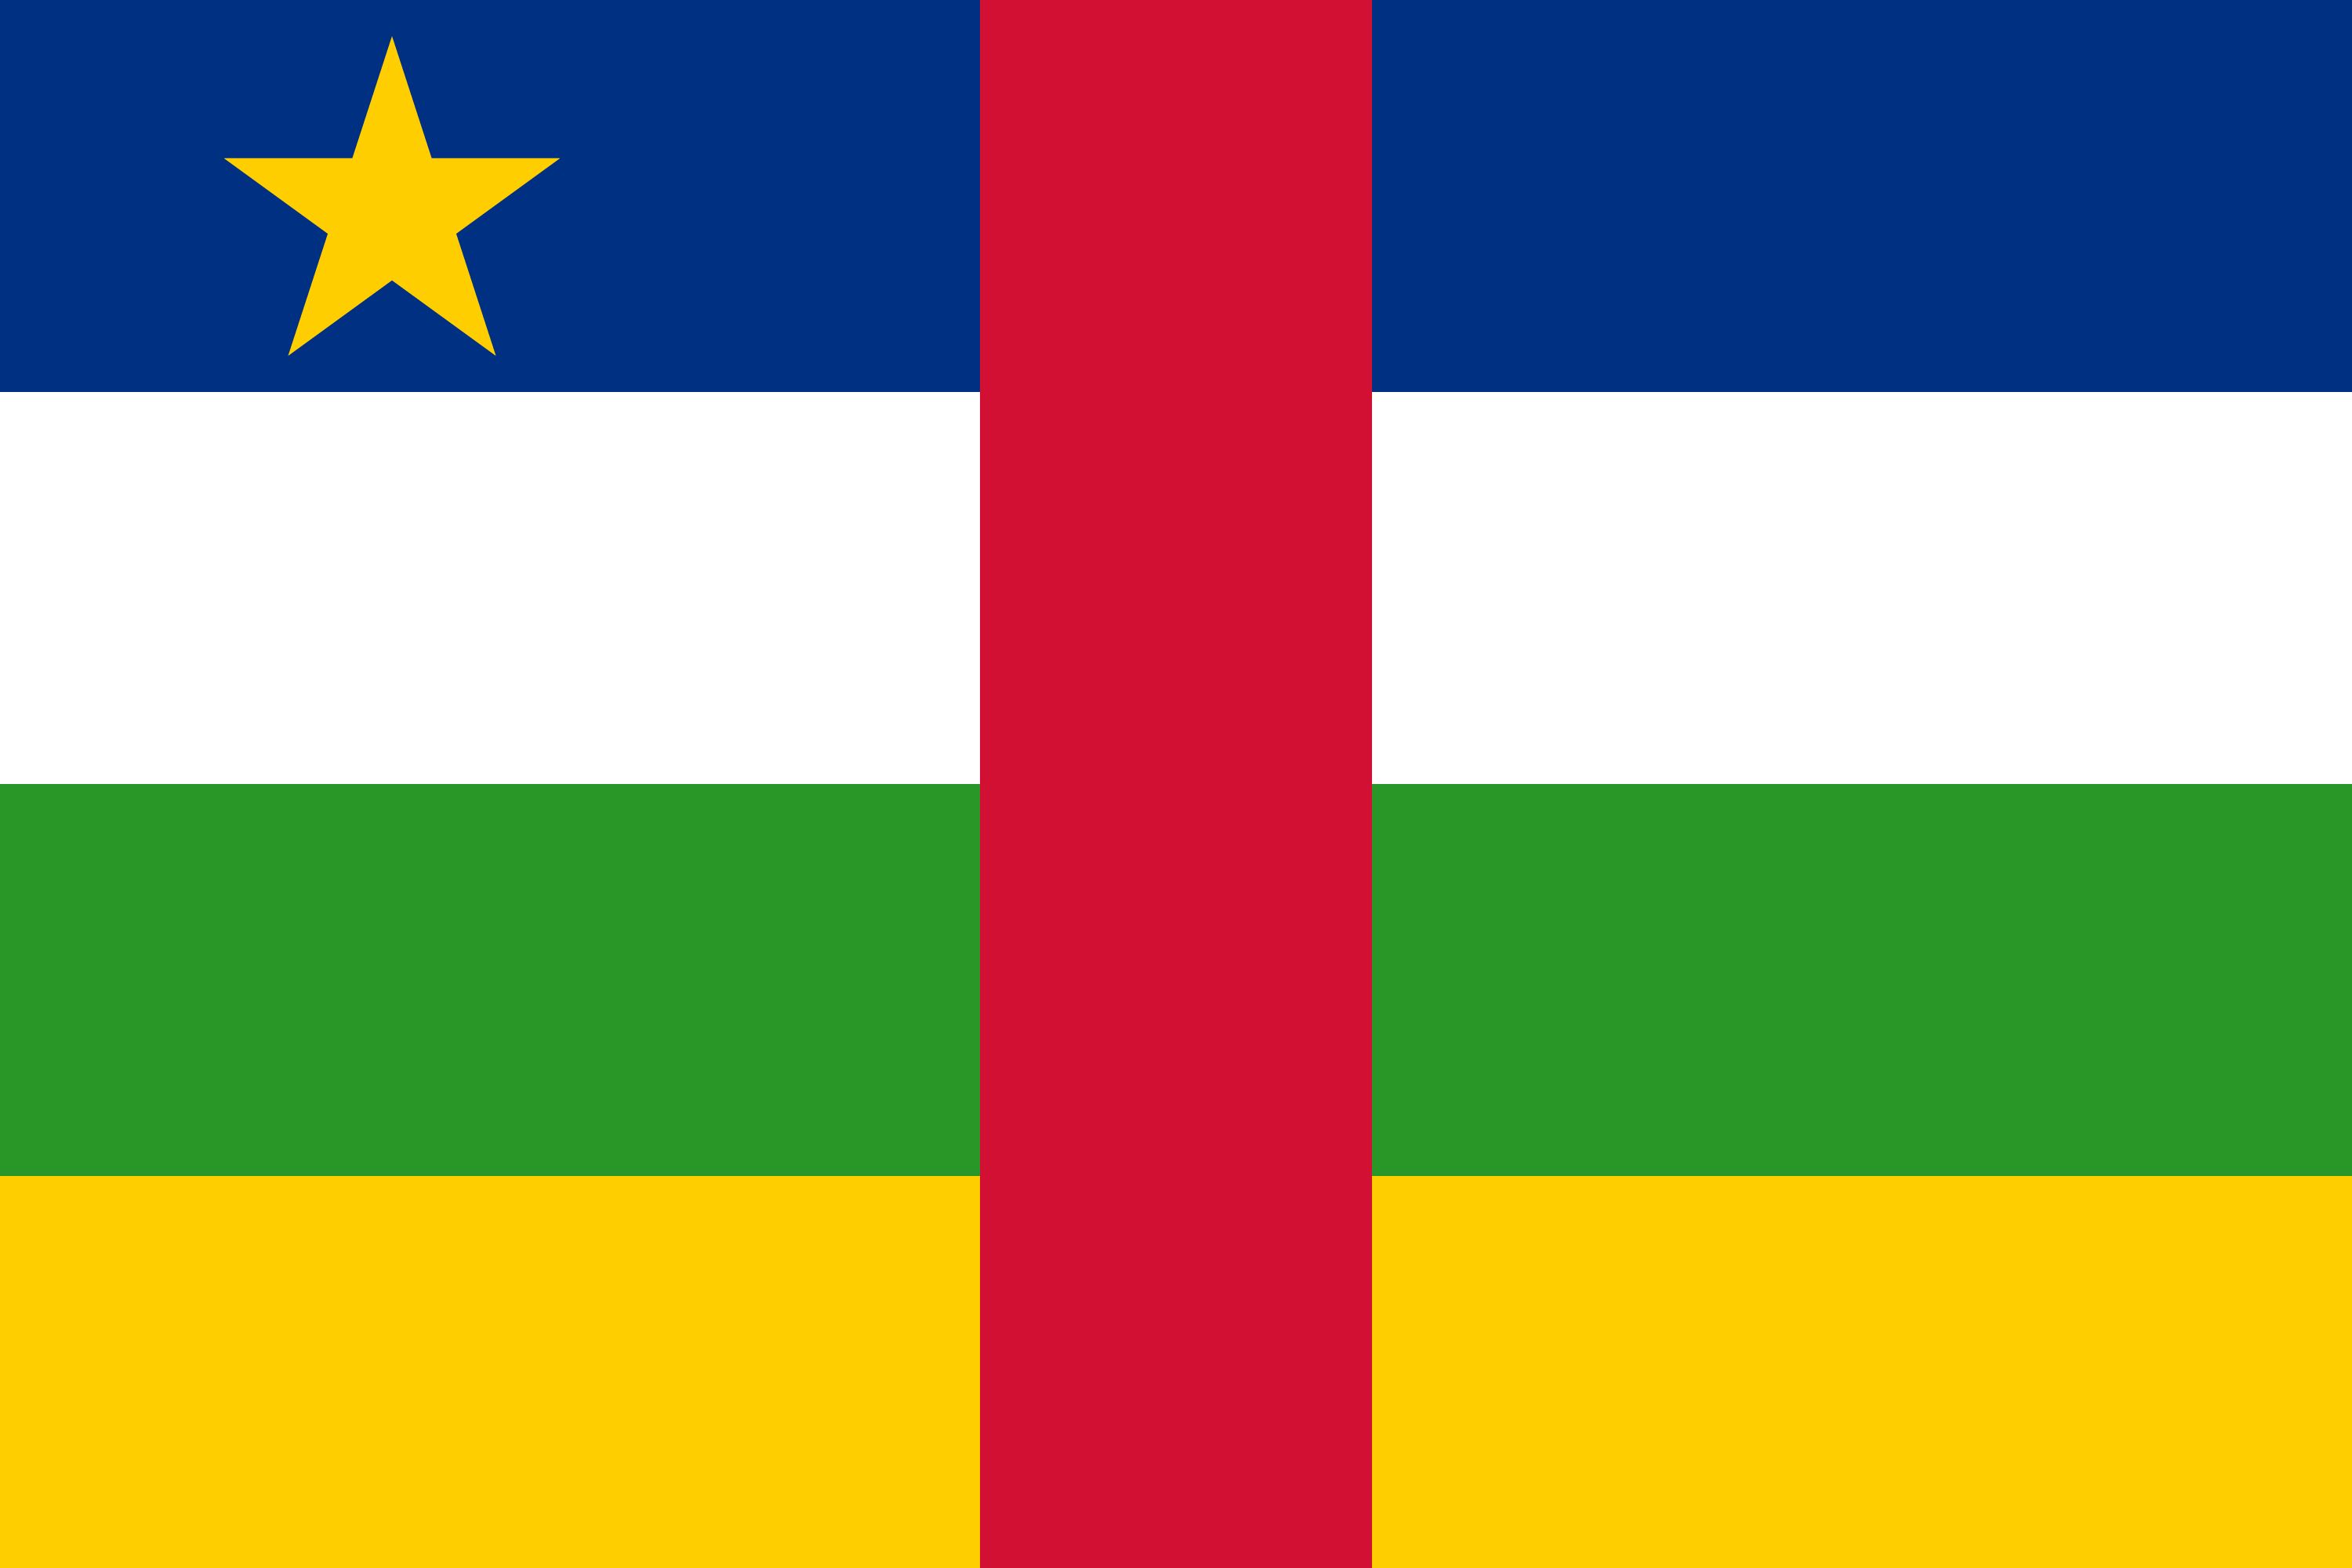 The Central-African Republic